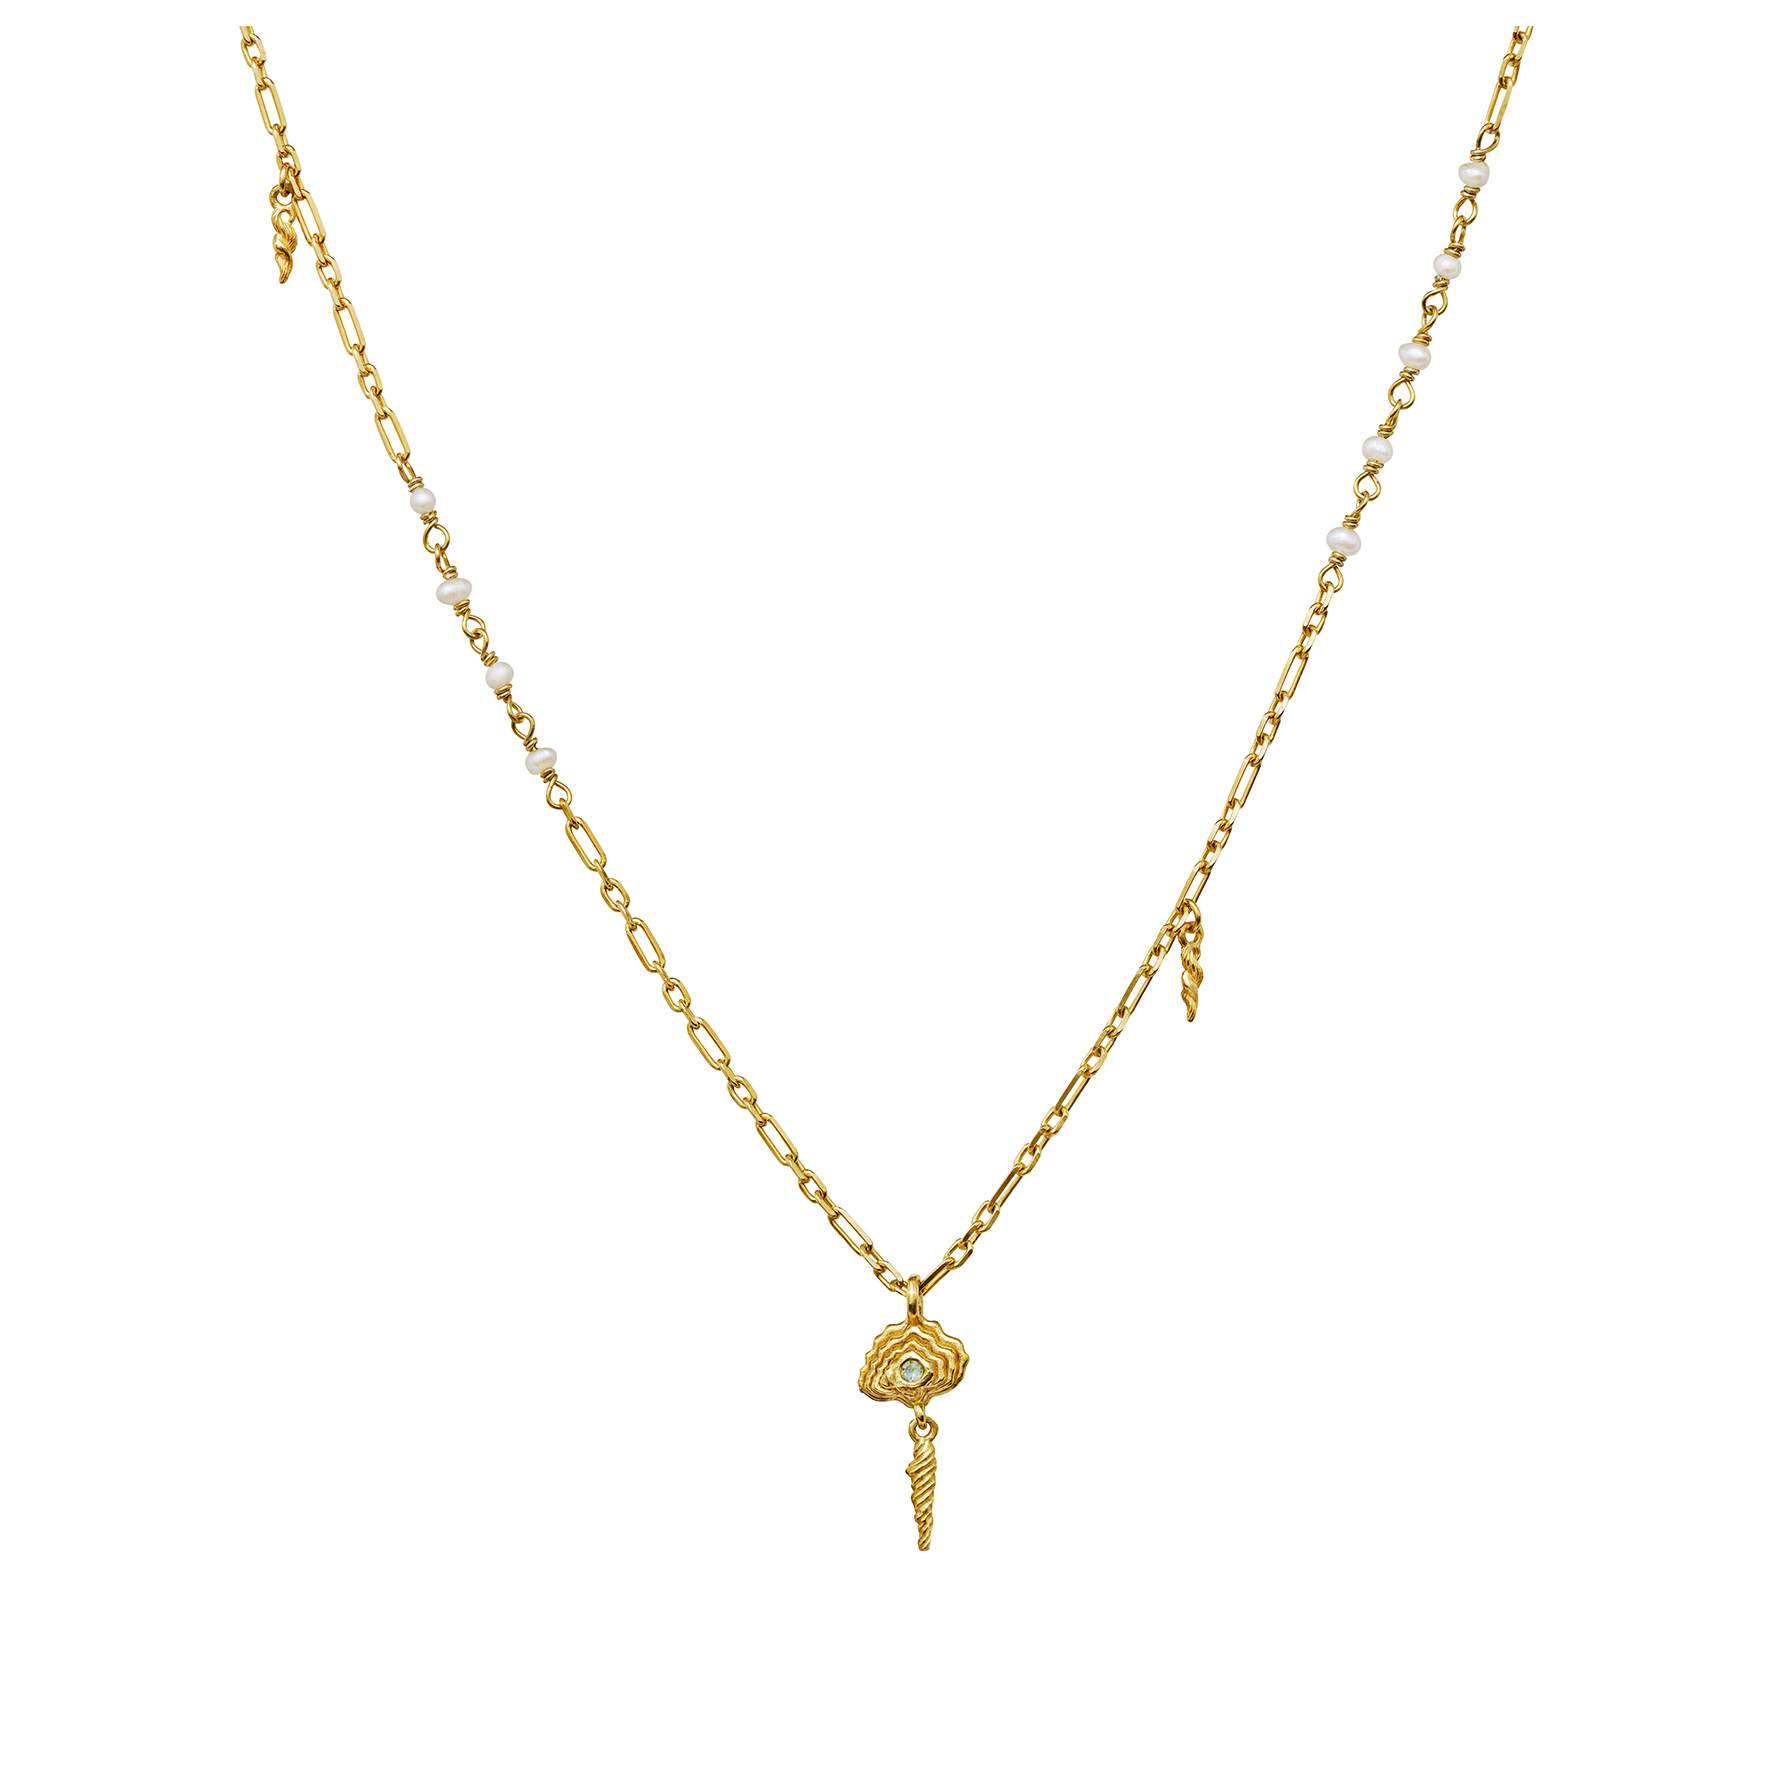 Benedicte Necklace from Maanesten in Goldplated-Silver Sterling 925